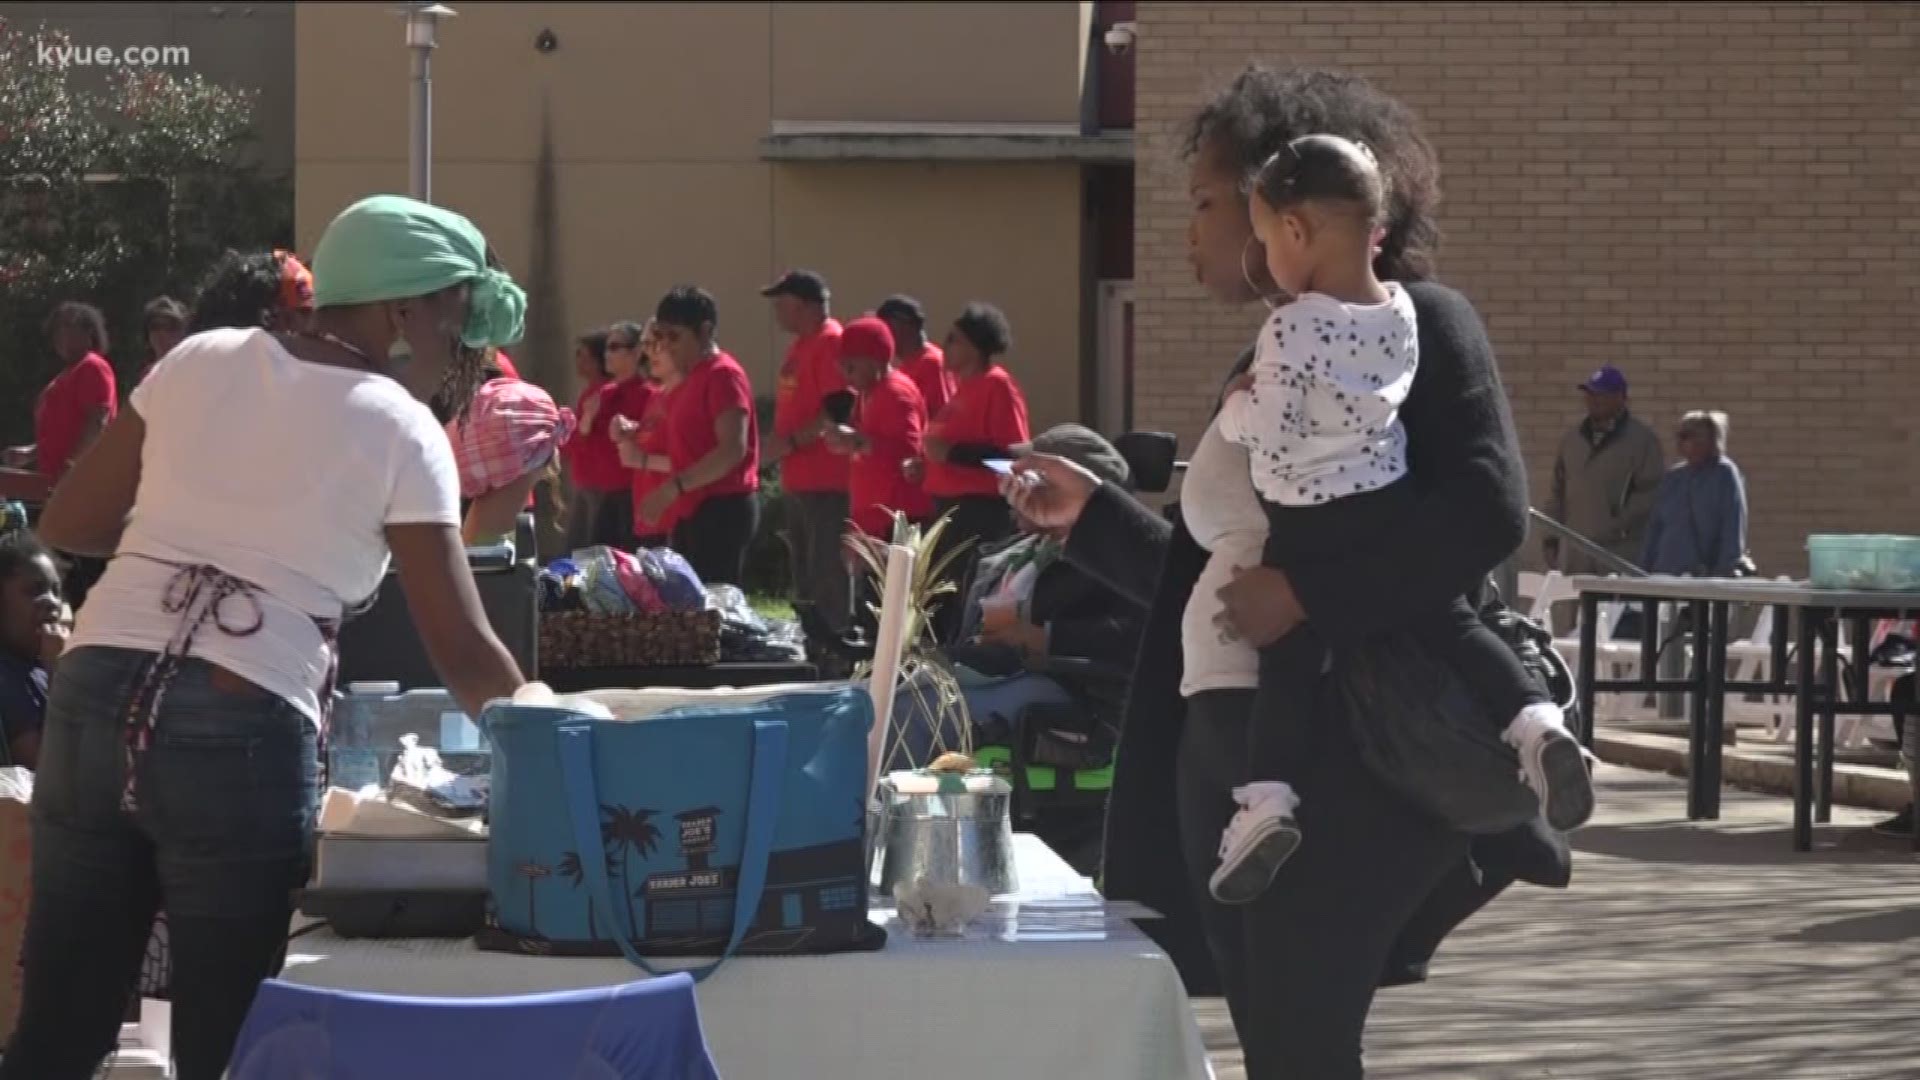 George Washington Carver Museum kicked off Black History Month with a block party.